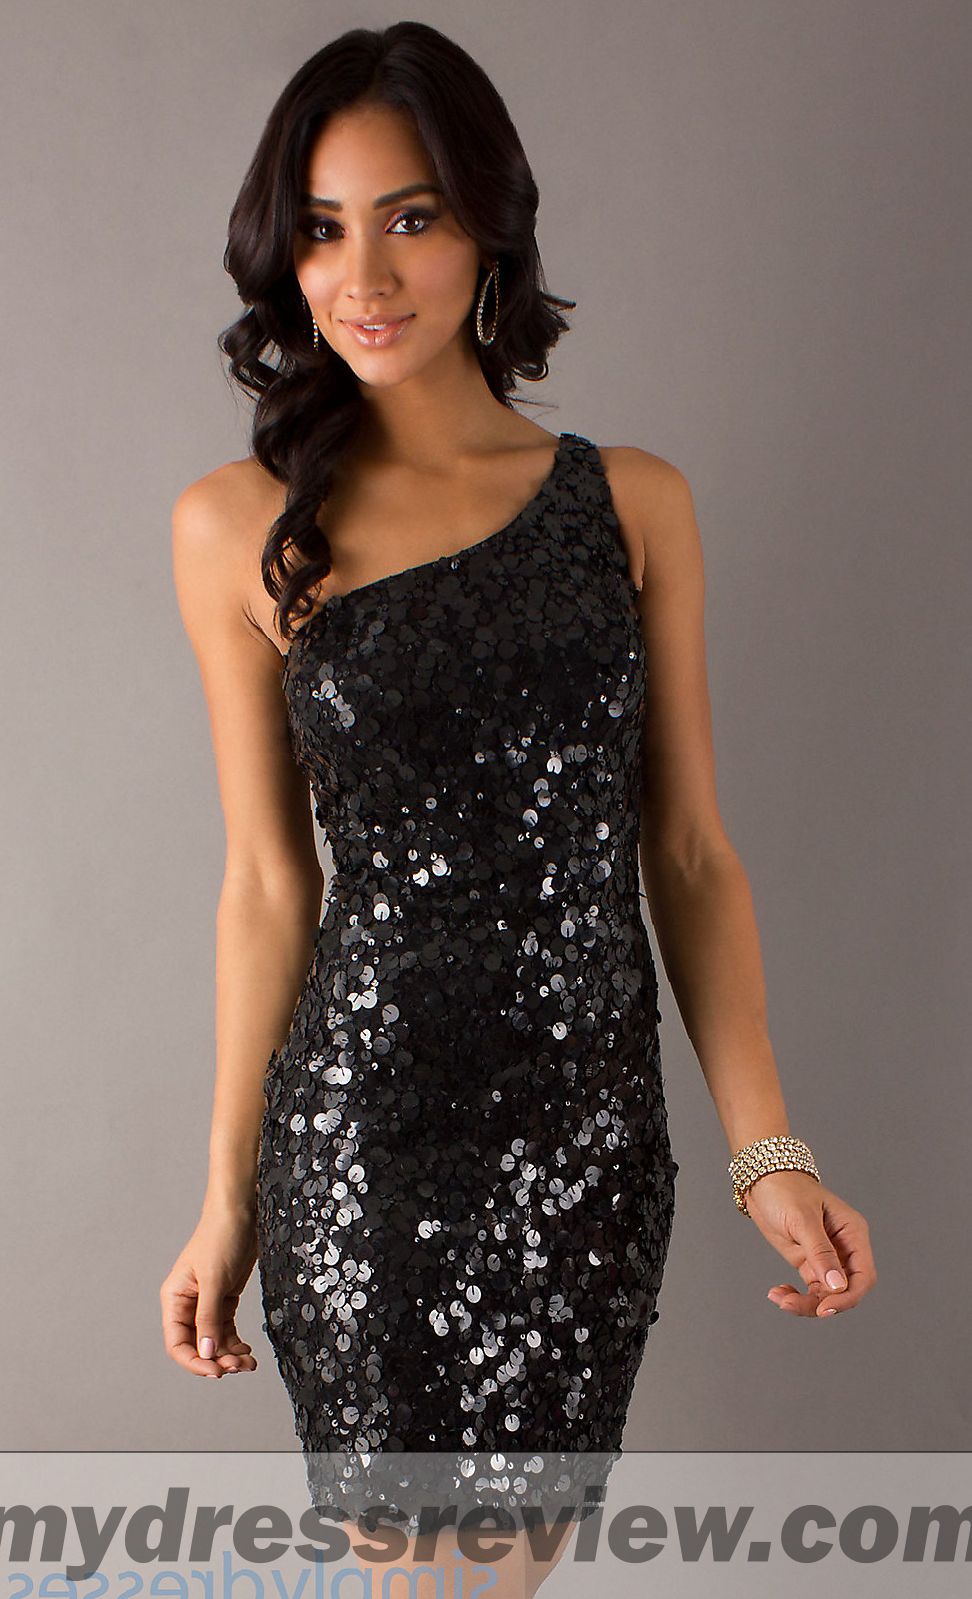 Black Dress With Sequin Top & 2017 Fashion Trends